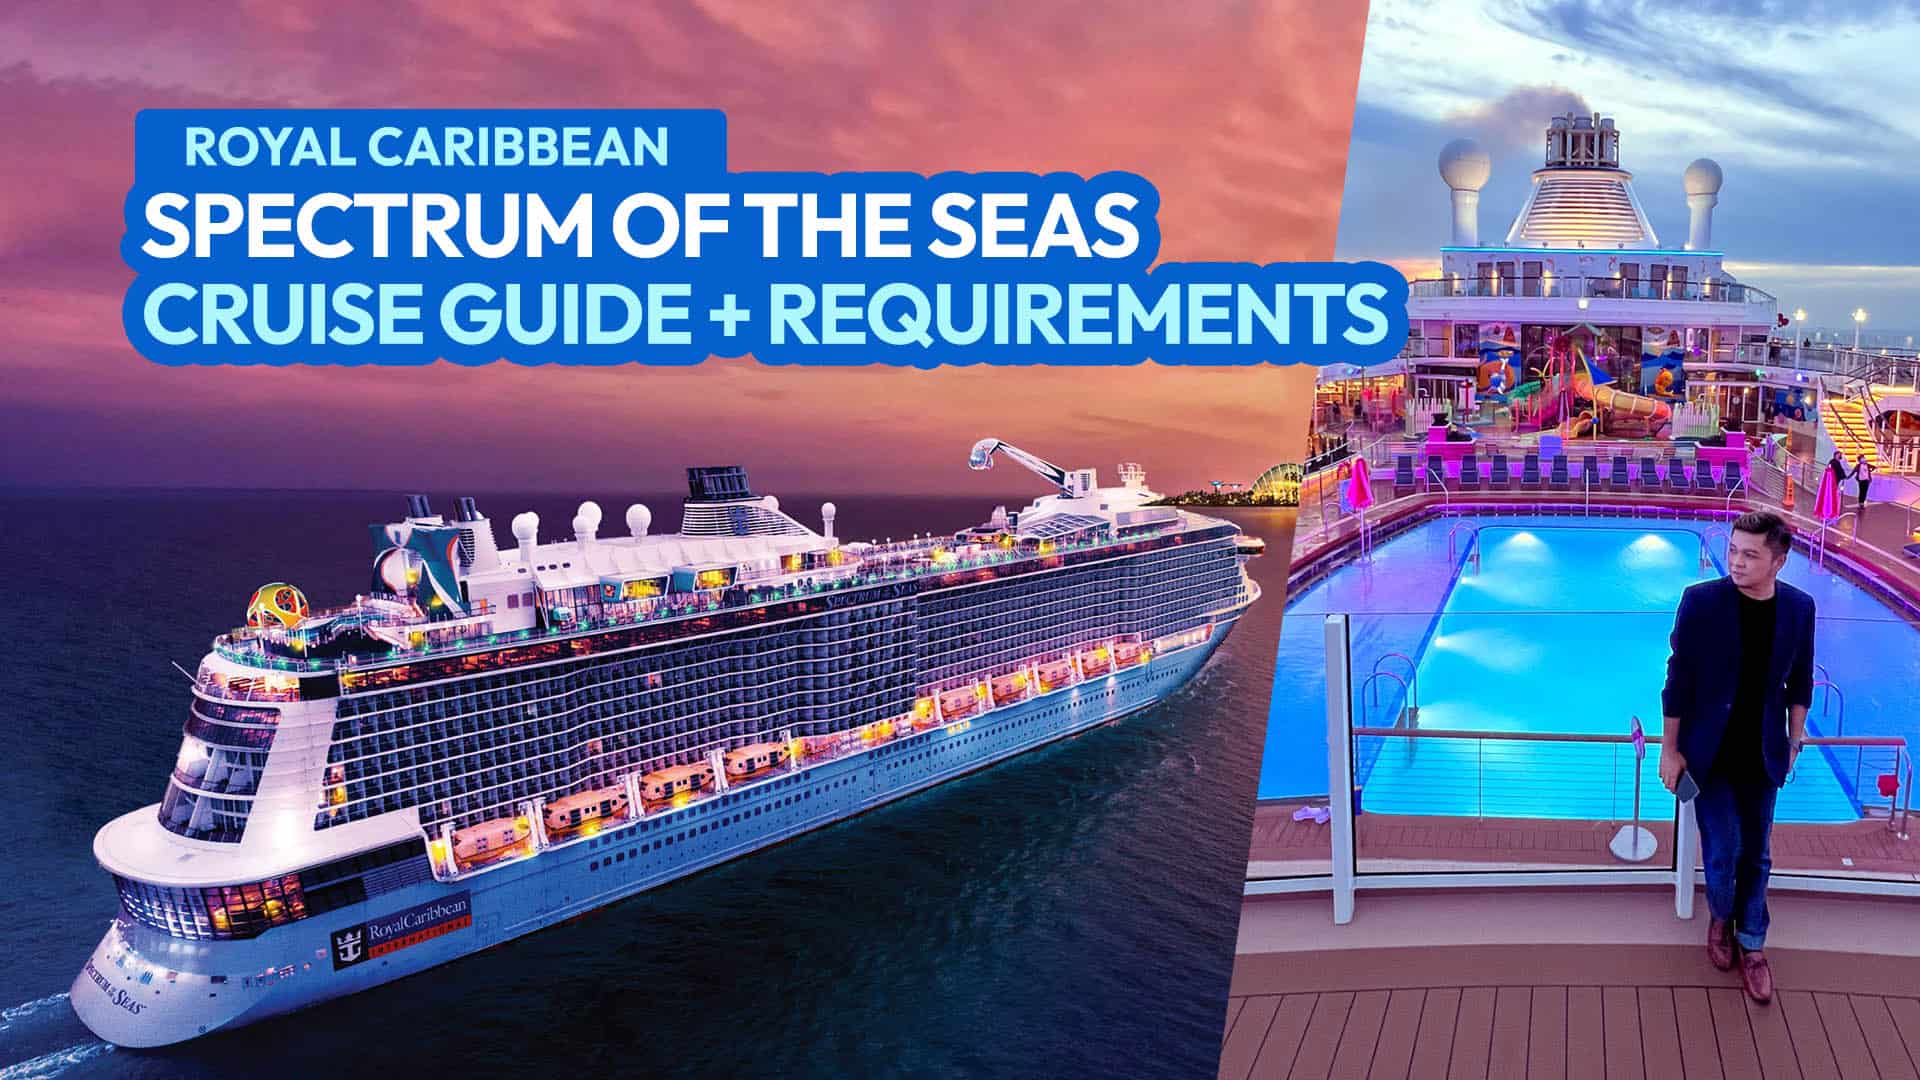 2023 Royal Caribbean SPECTRUM OF THE SEAS Singapore Cruise Requirements & Check In Process